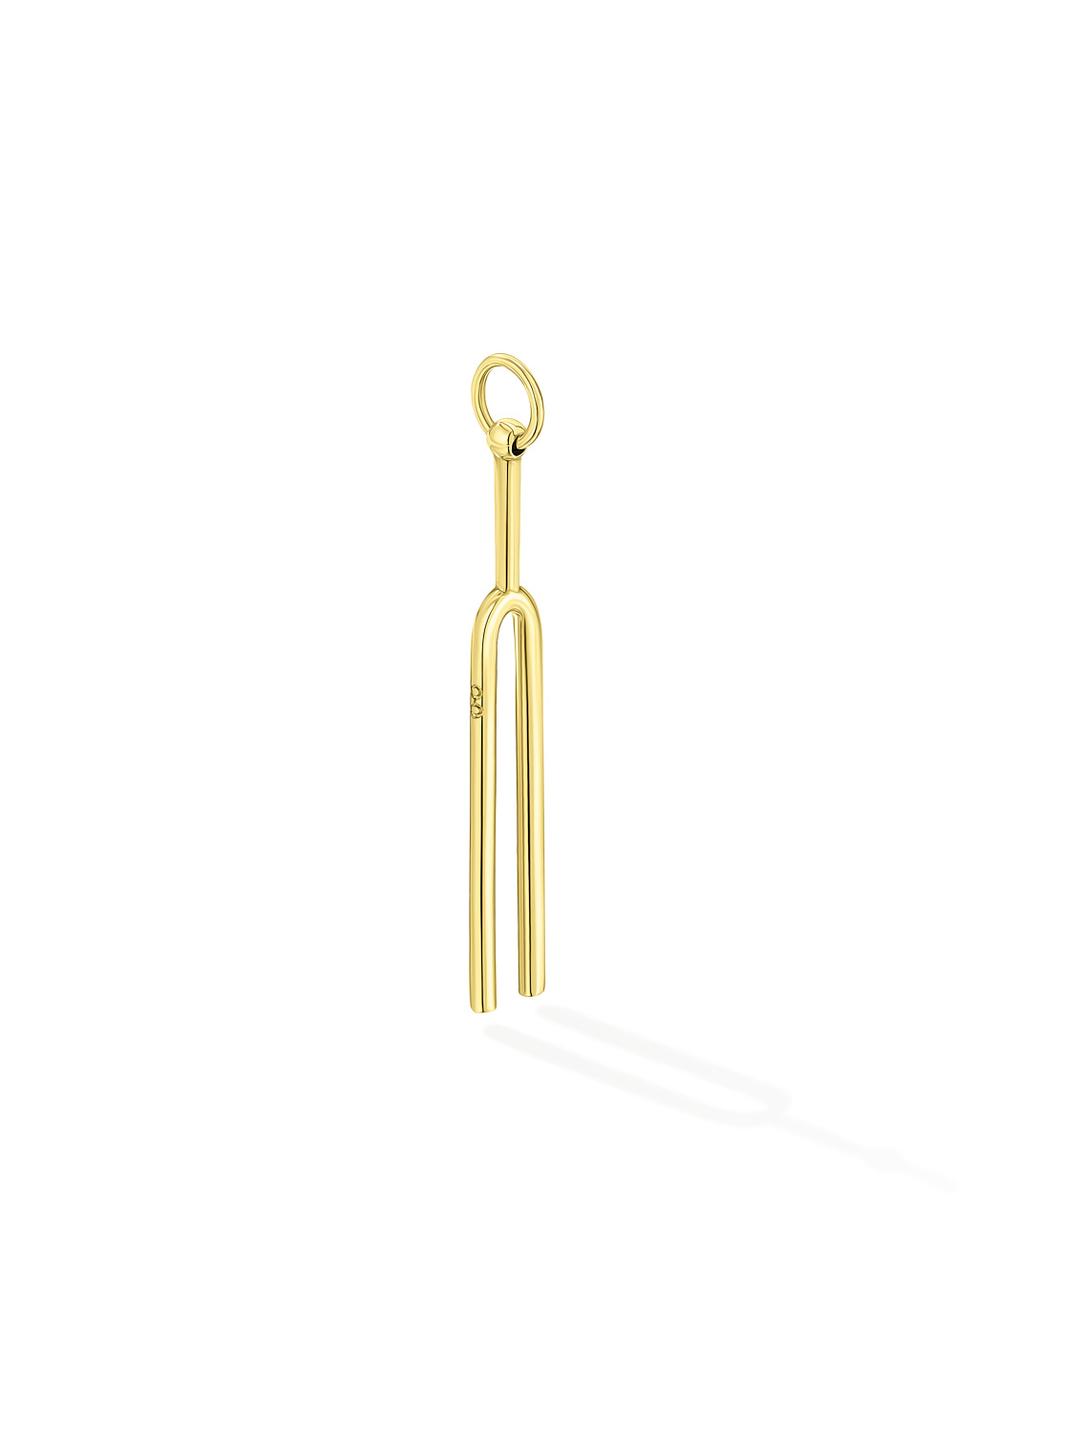 The Pitchfork Trinket With Gold Plating